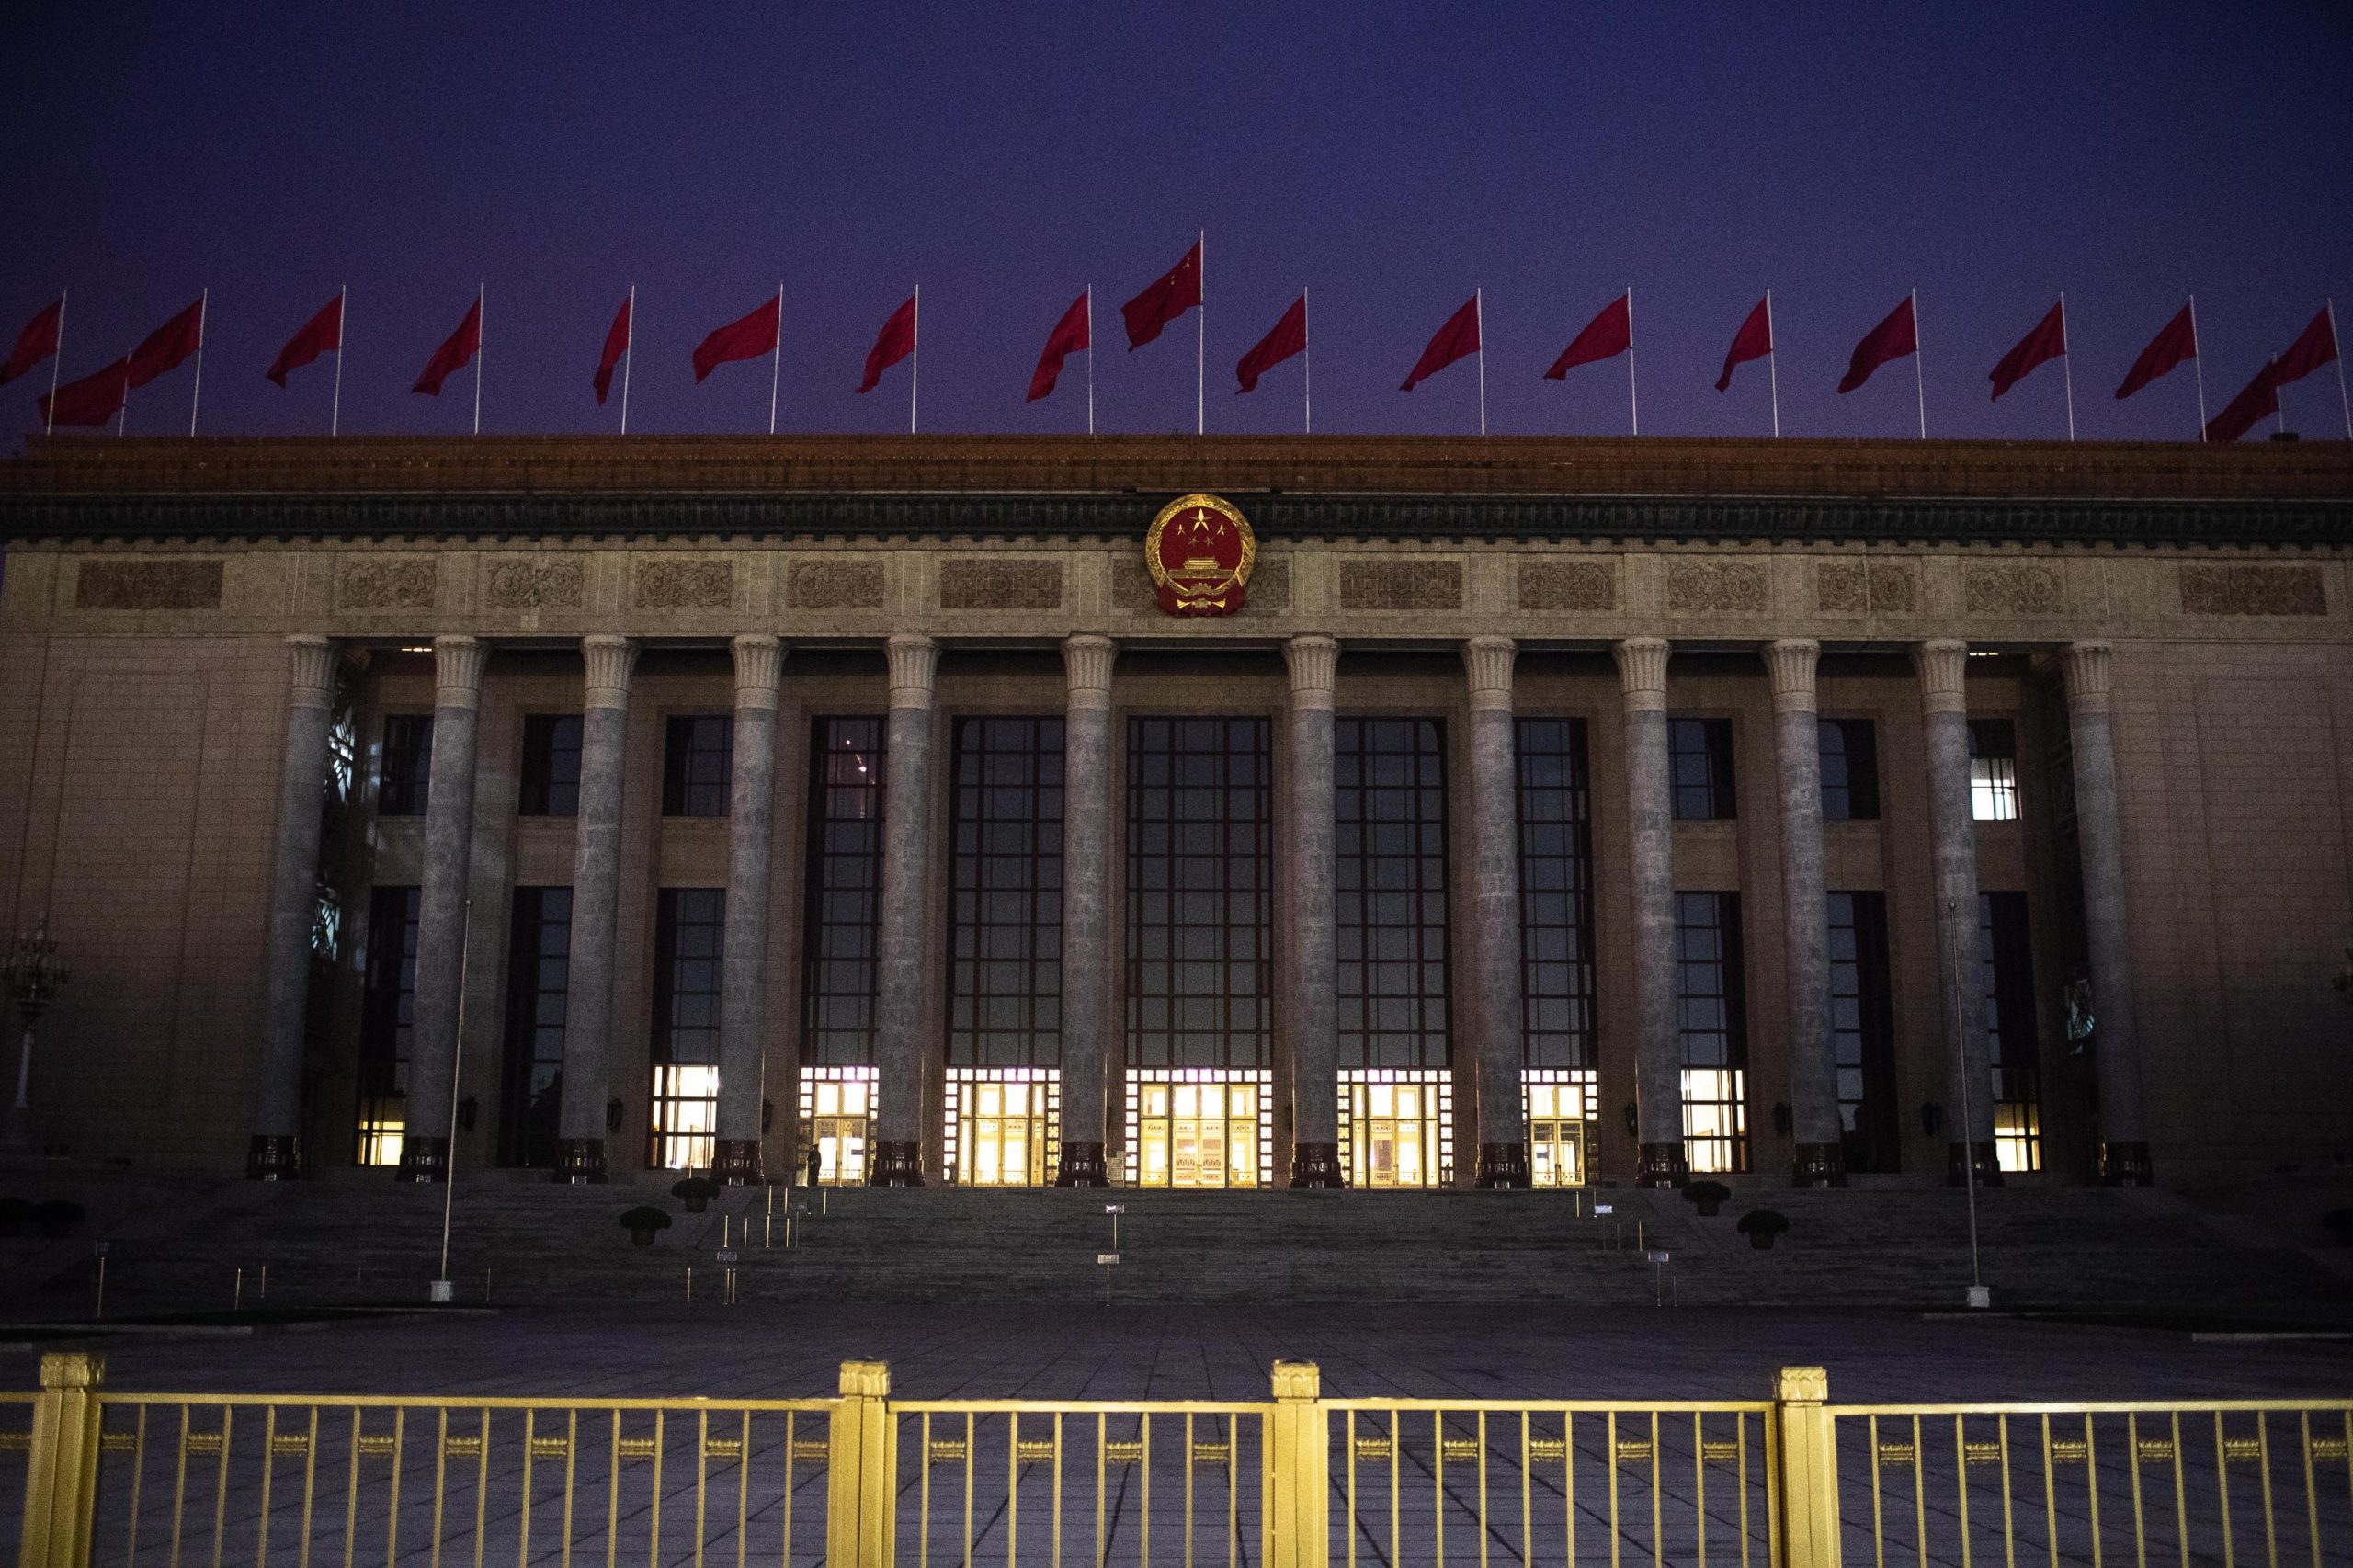 epa07452381 (23/23) A general view of a facade of The Great Hall of the People in the early morning before the opening of the second session of the 13th National People's Congress in Beijing, China, 05 March 2019. Flanking the western edge of Tiananmen Square in downtown Beijing, the Great Hall of the People (GHOP), China's seat of government and center of state power, is one of the country's most iconic sites.  EPA/ROMAN PILIPEY  ATTENTION: For the full PHOTO ESSAY text please see Advisory Notice epa07452355